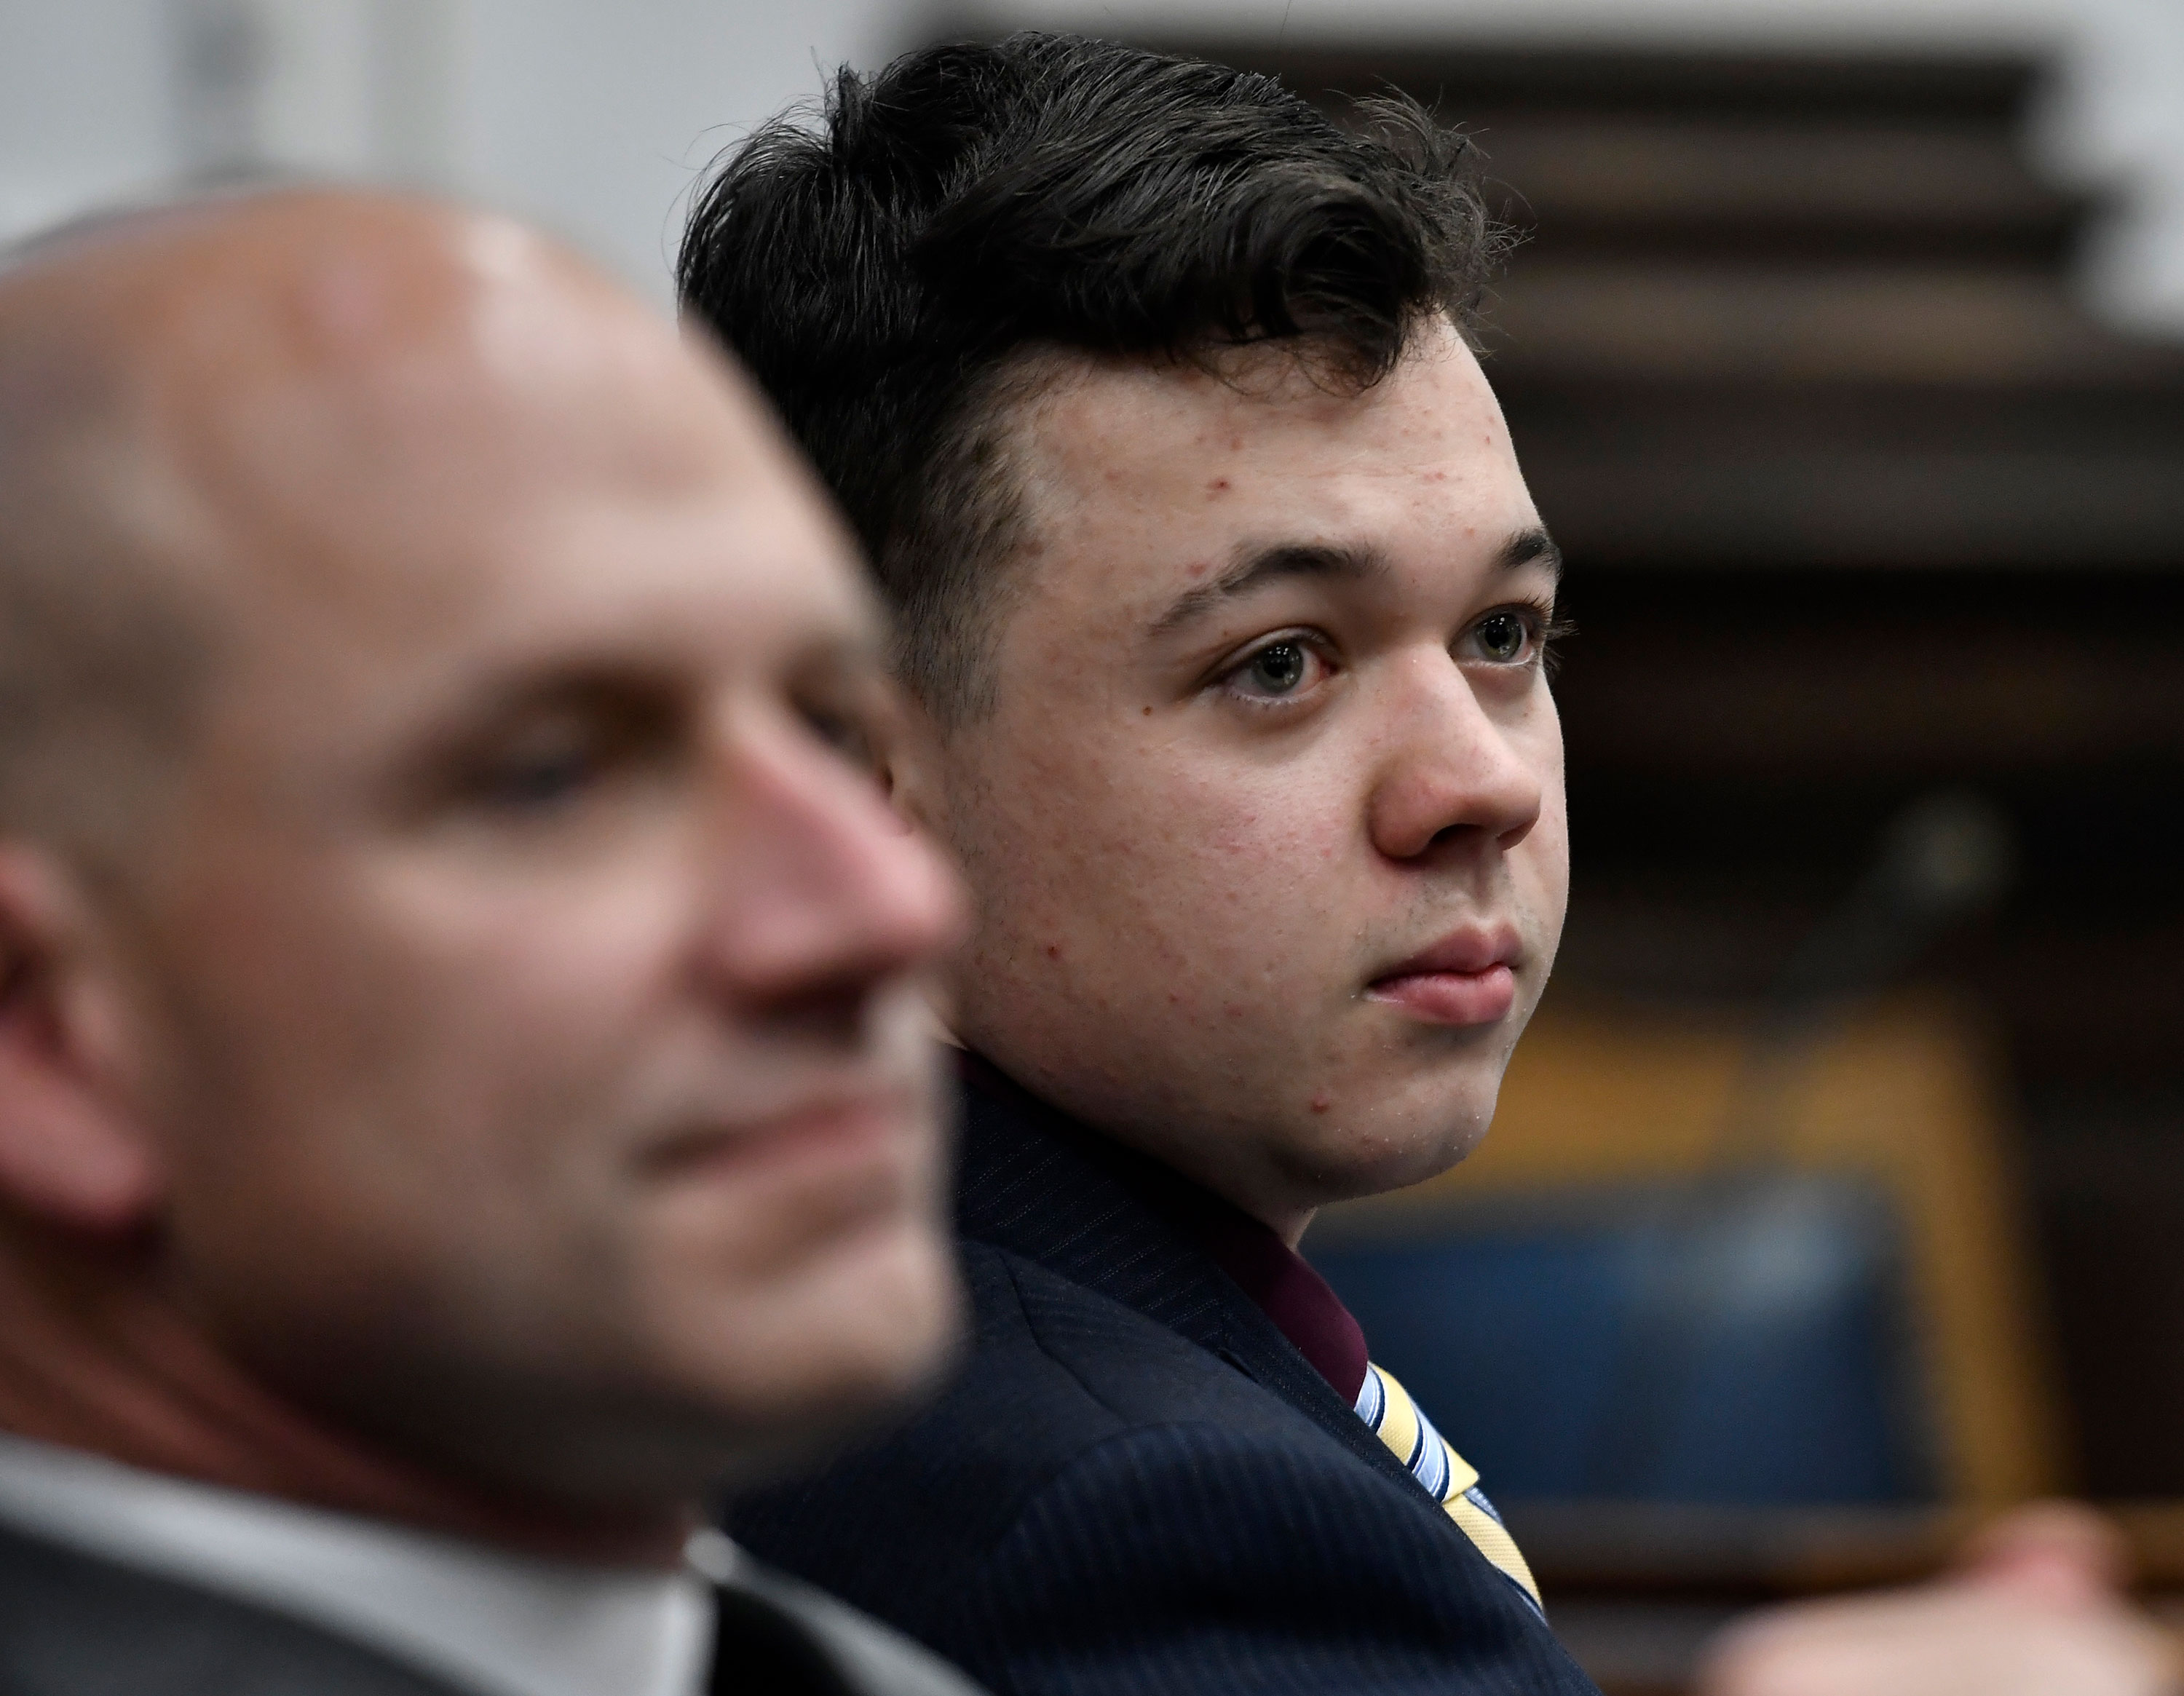 Kyle Rittenhouse and his attorney Corey Chirafisi listen during his trial in Kenosha, Wisconsin, on Thursday.